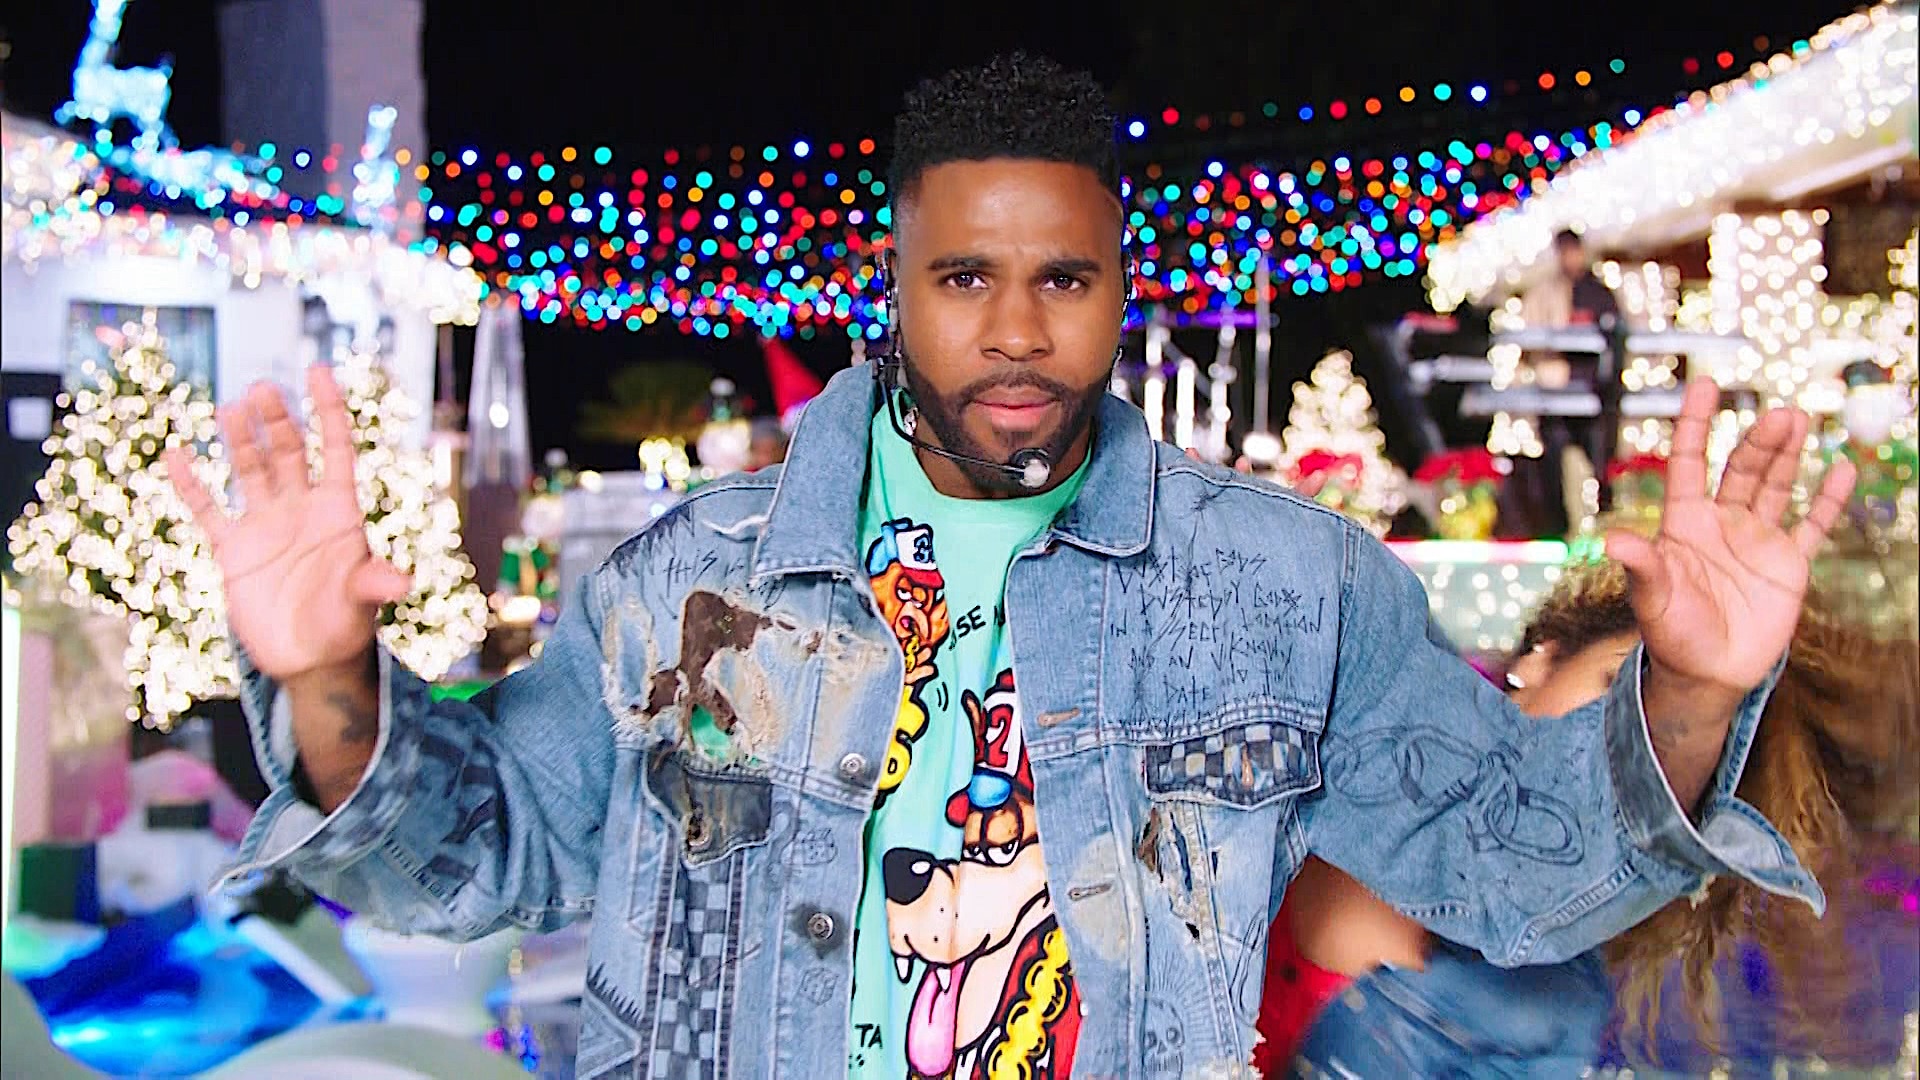 Watch The Voice Highlight: Jason Derulo Performs a Medley of "Take You